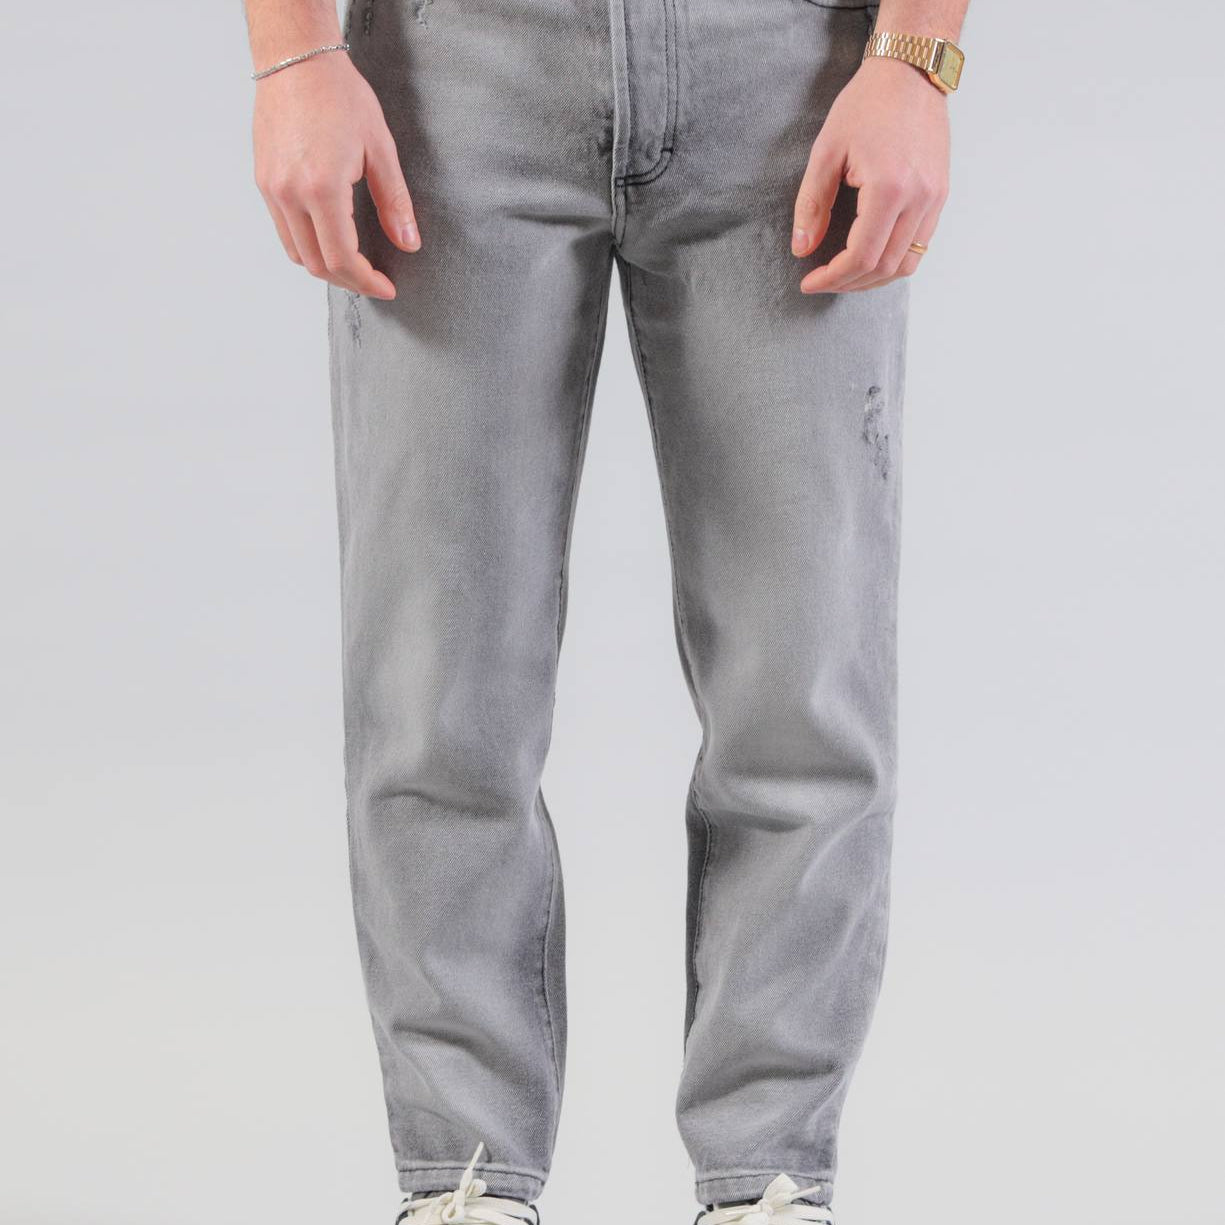 Jeans Gray Baly